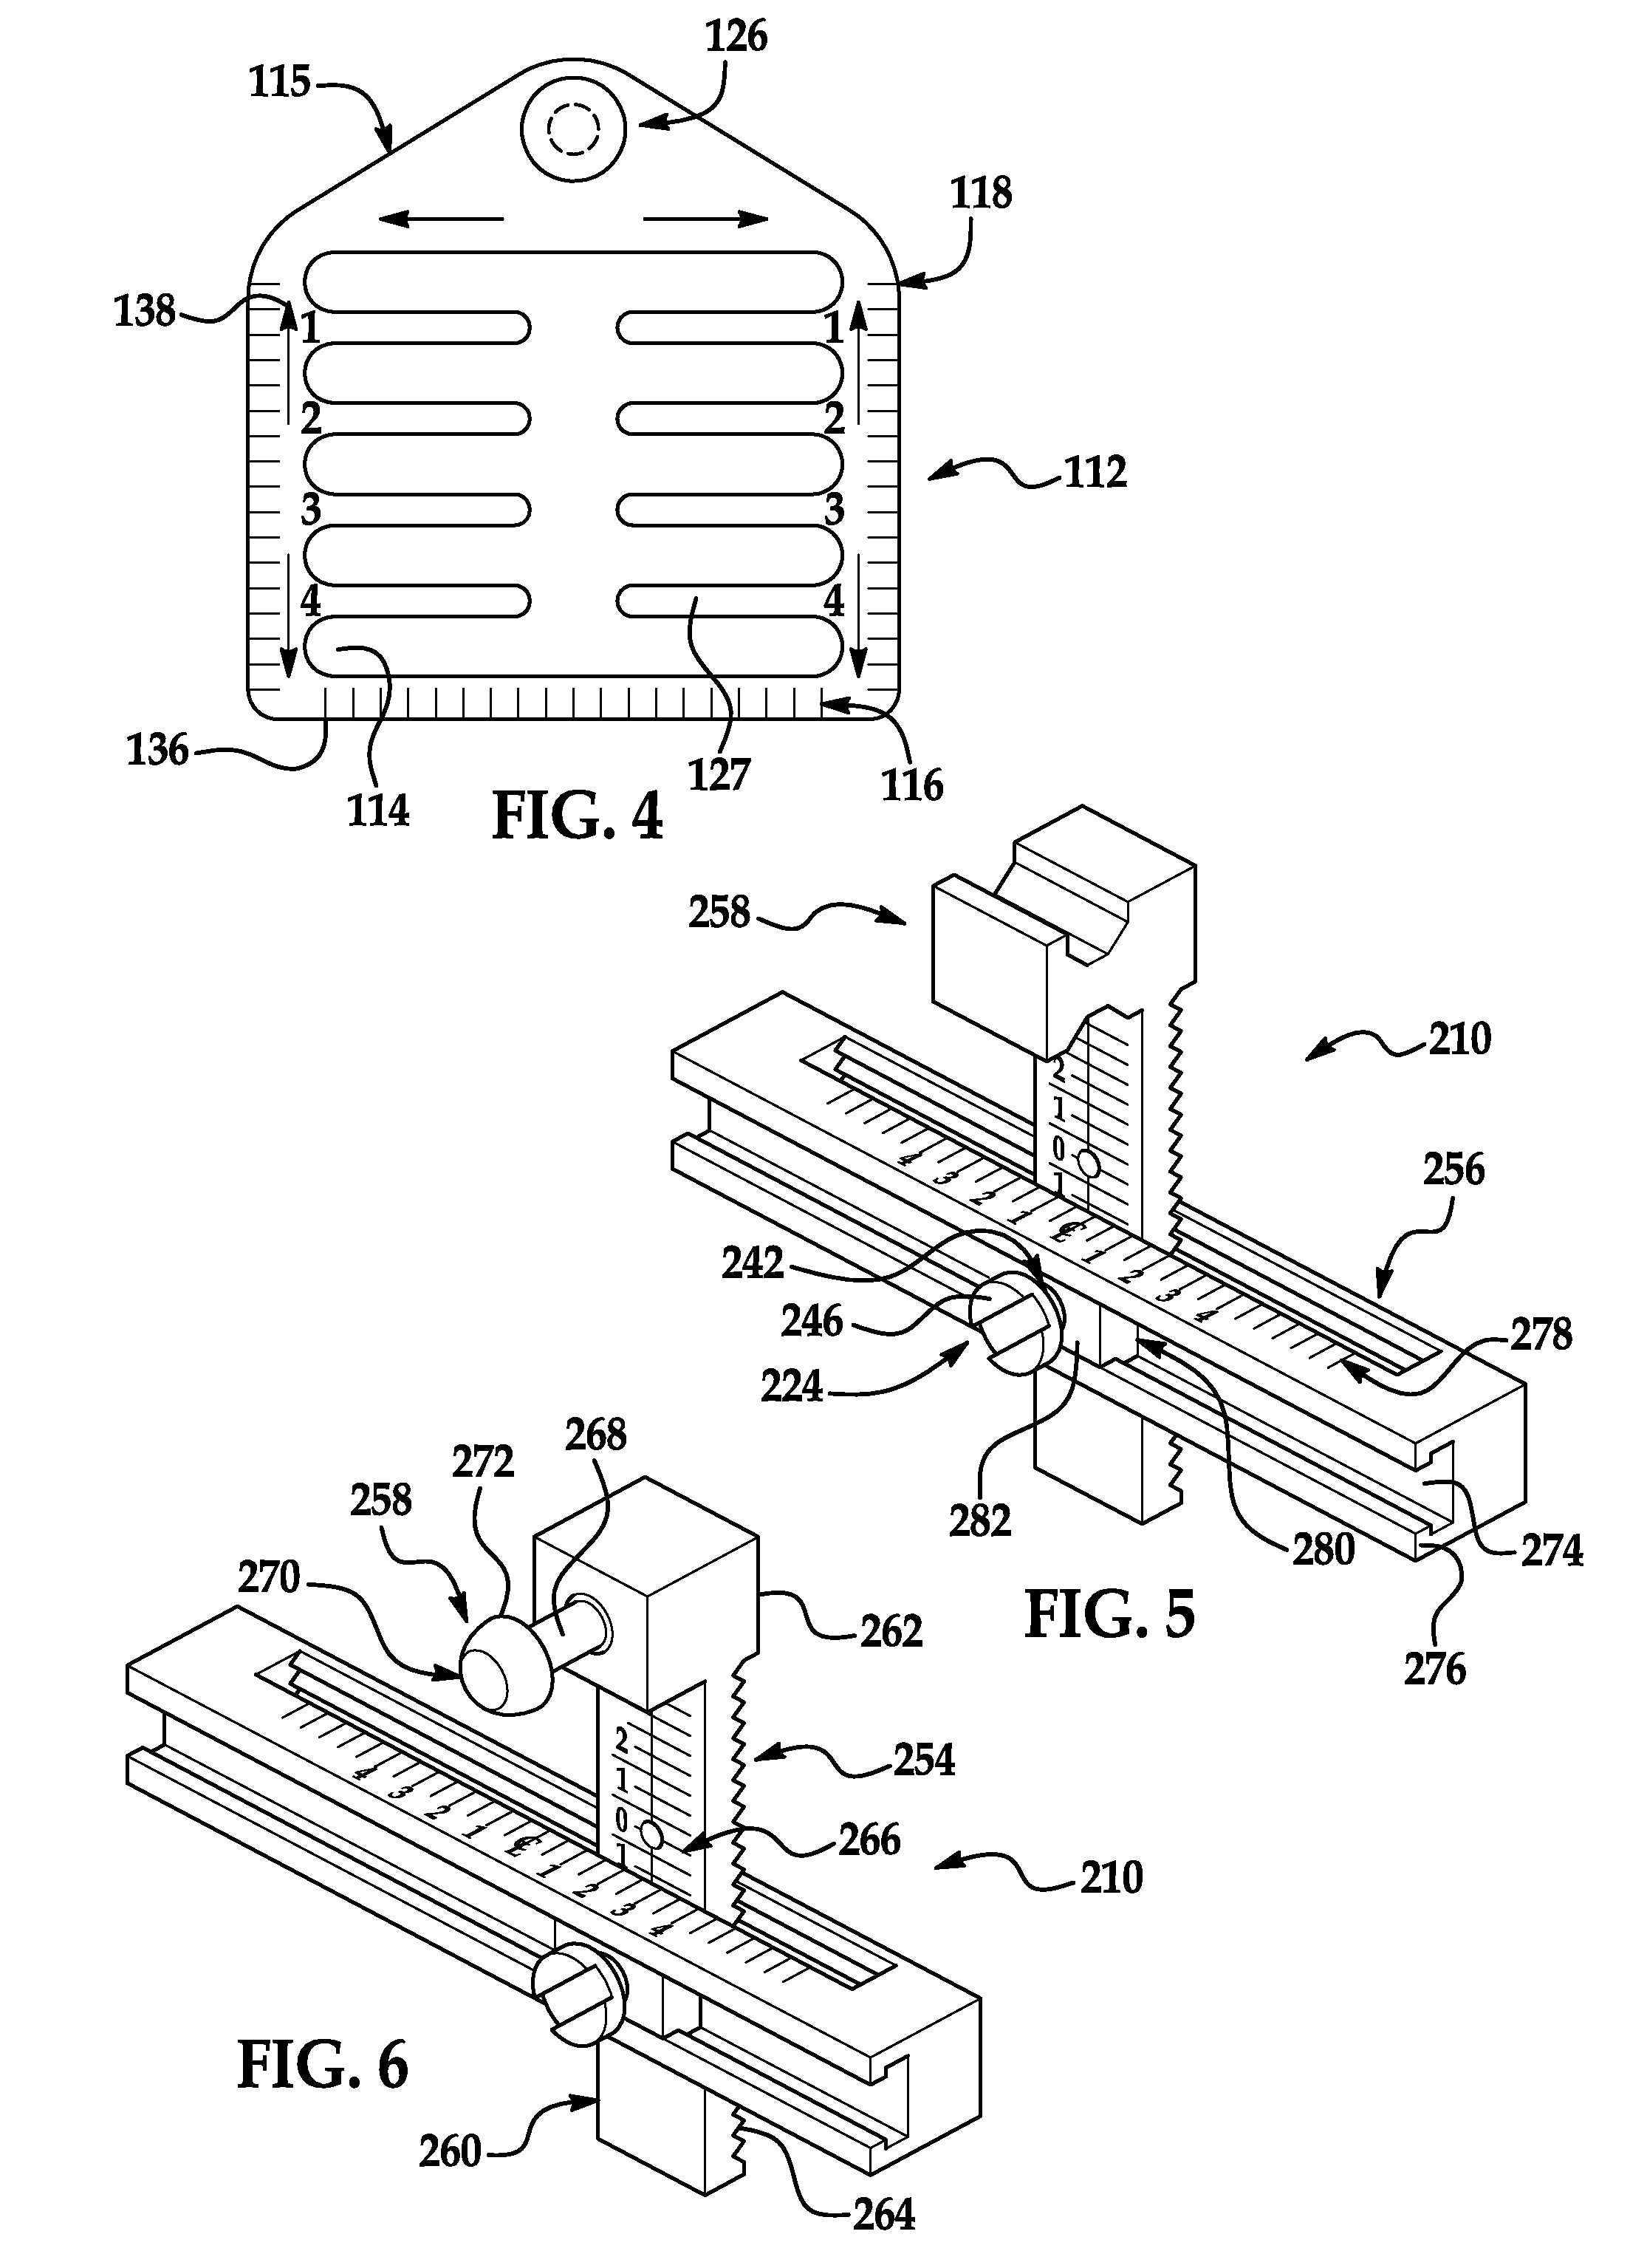 Adjustable wall-hanger assembly